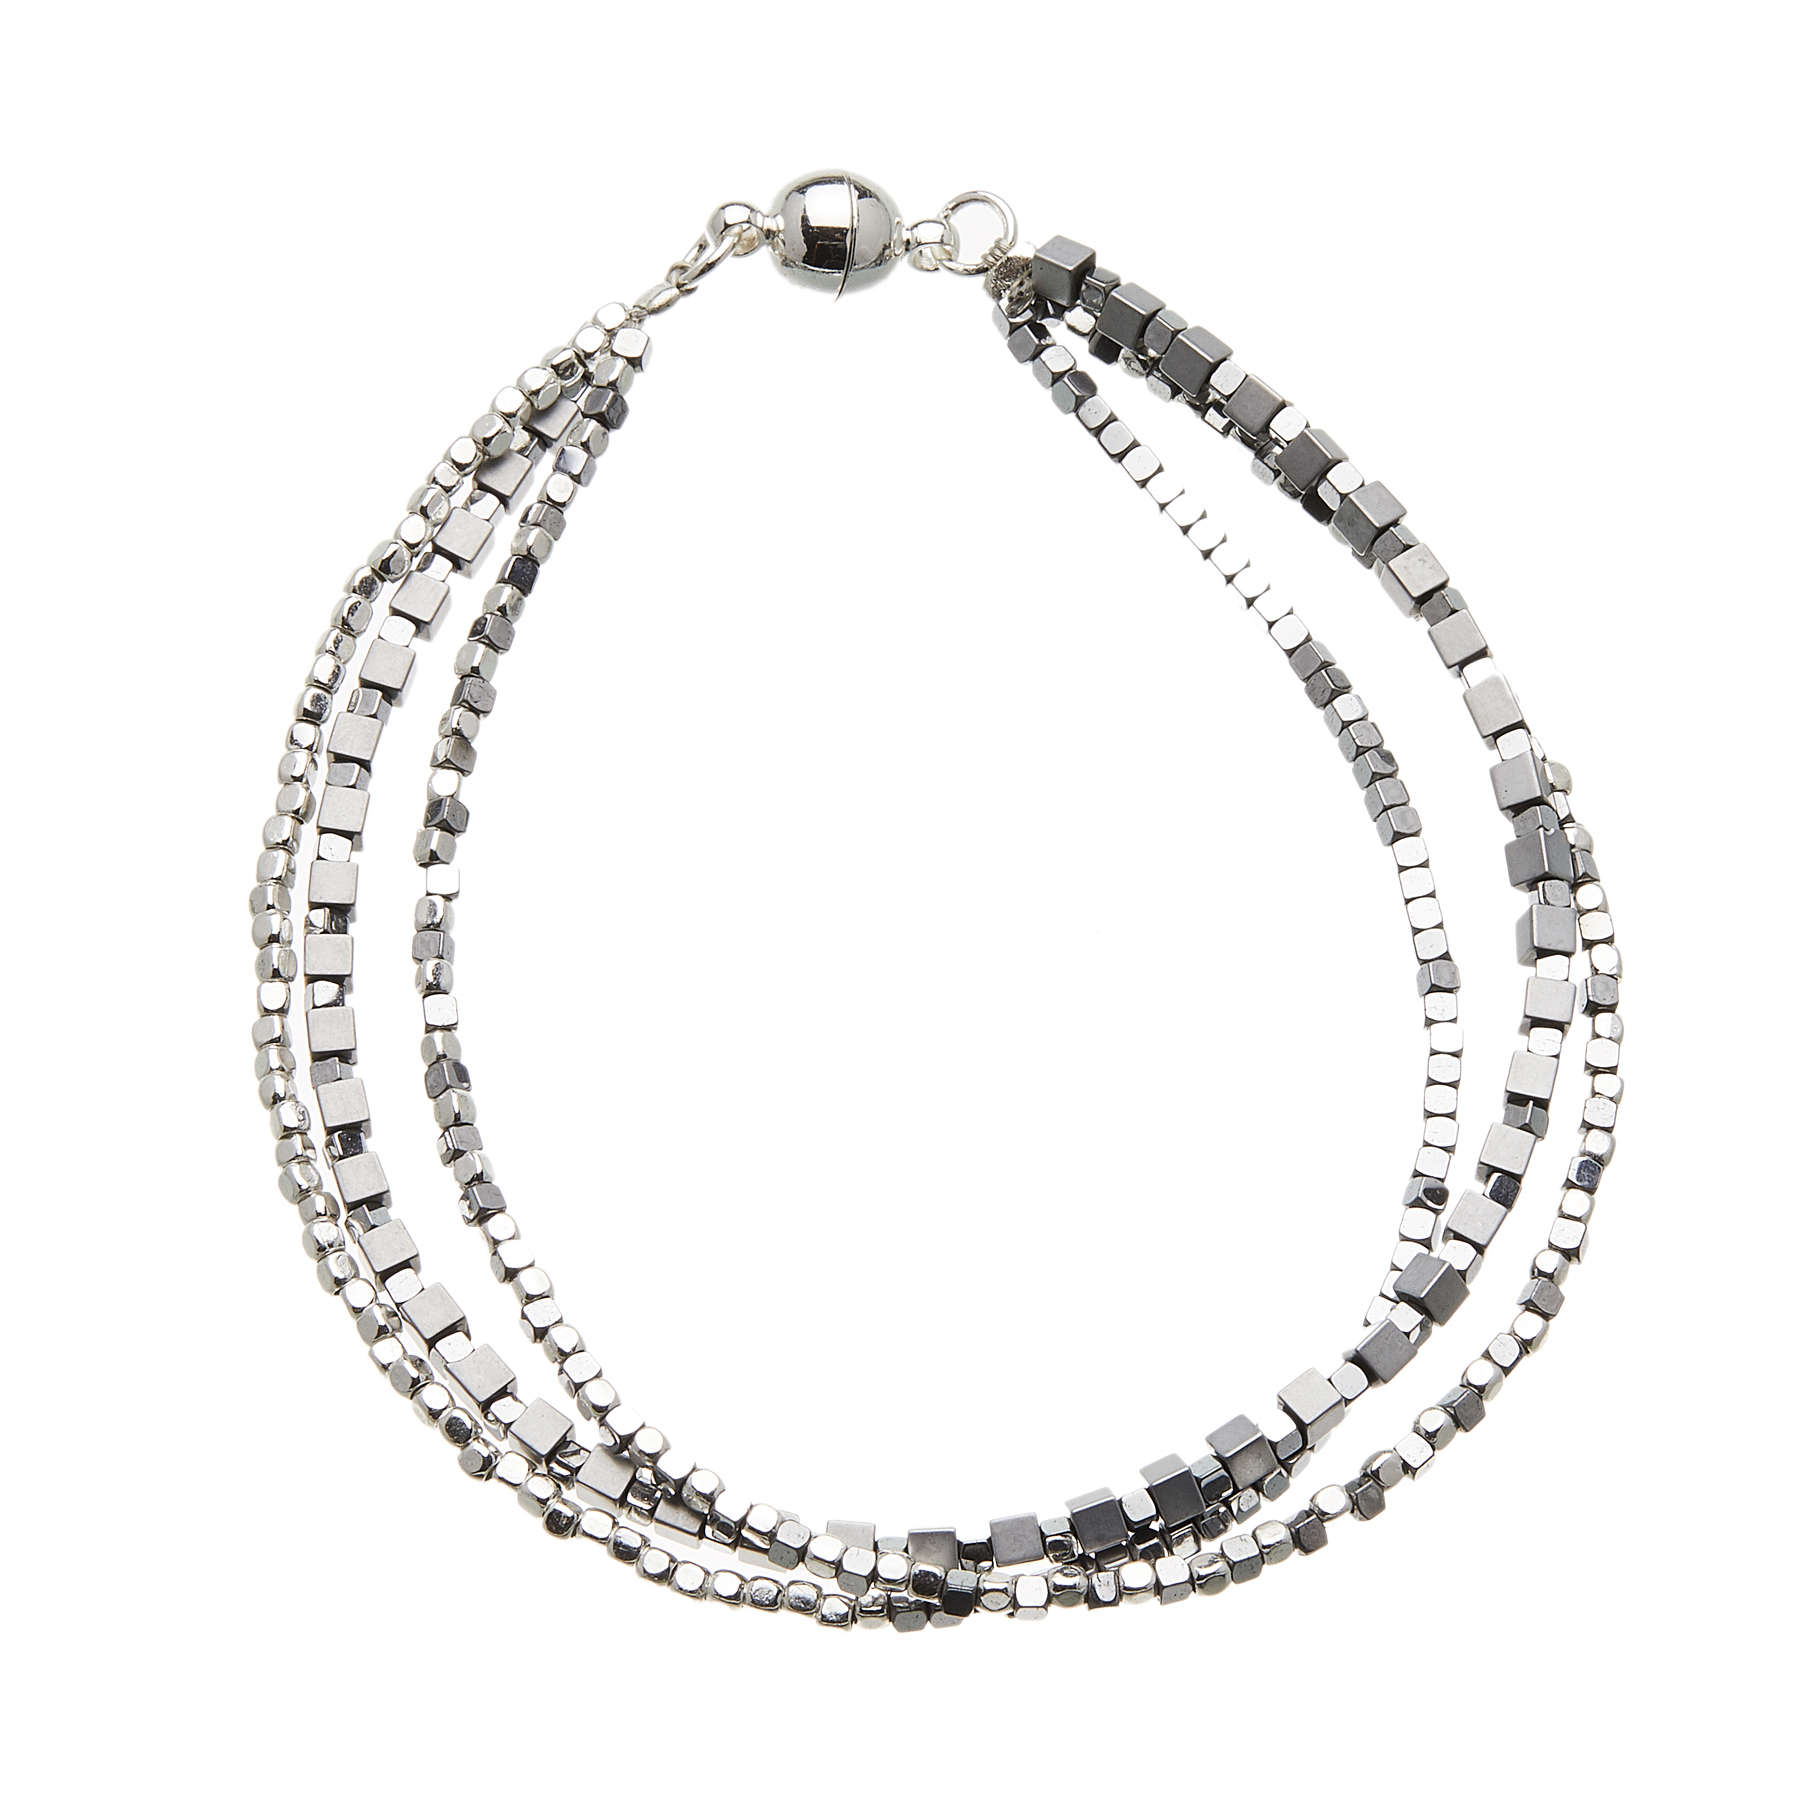 Silver Bracelet with three strands of silver and grey beads - Rafa S